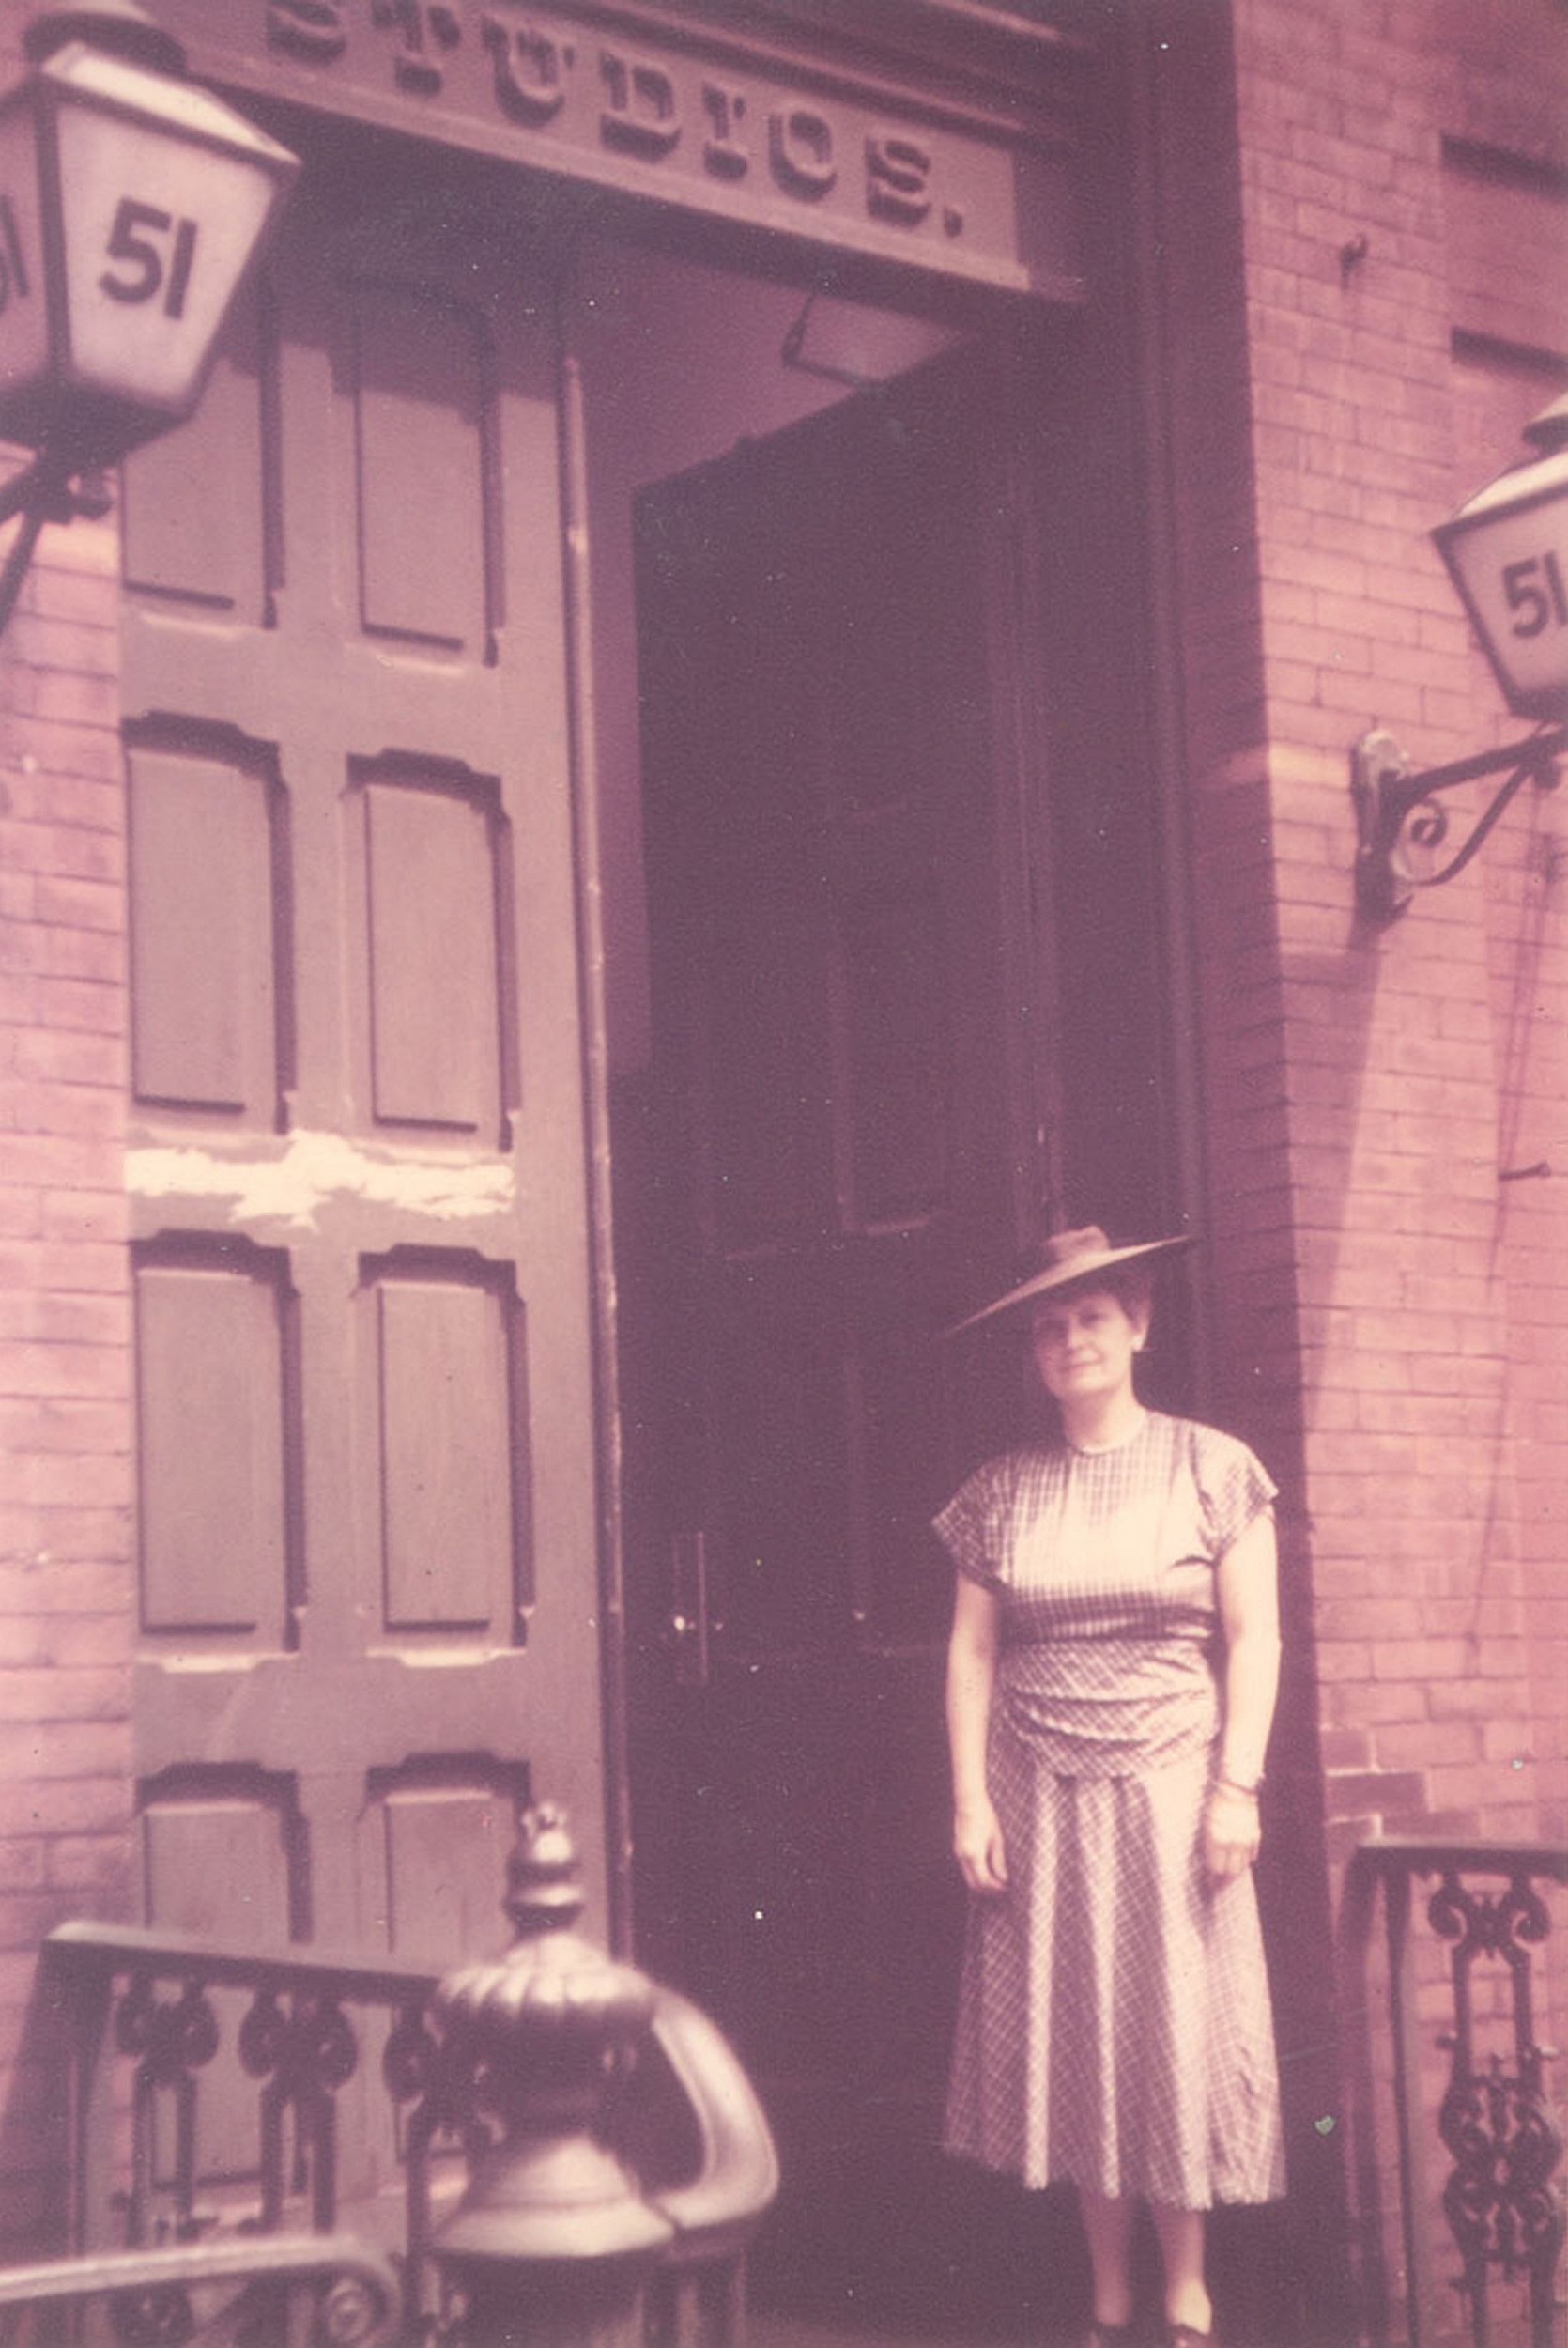 Purple-tinged photograph of a woman in a dress and hat standing in front of a large door, above which is the word "STUDIOS." A lantern in the upper left has the number "51."